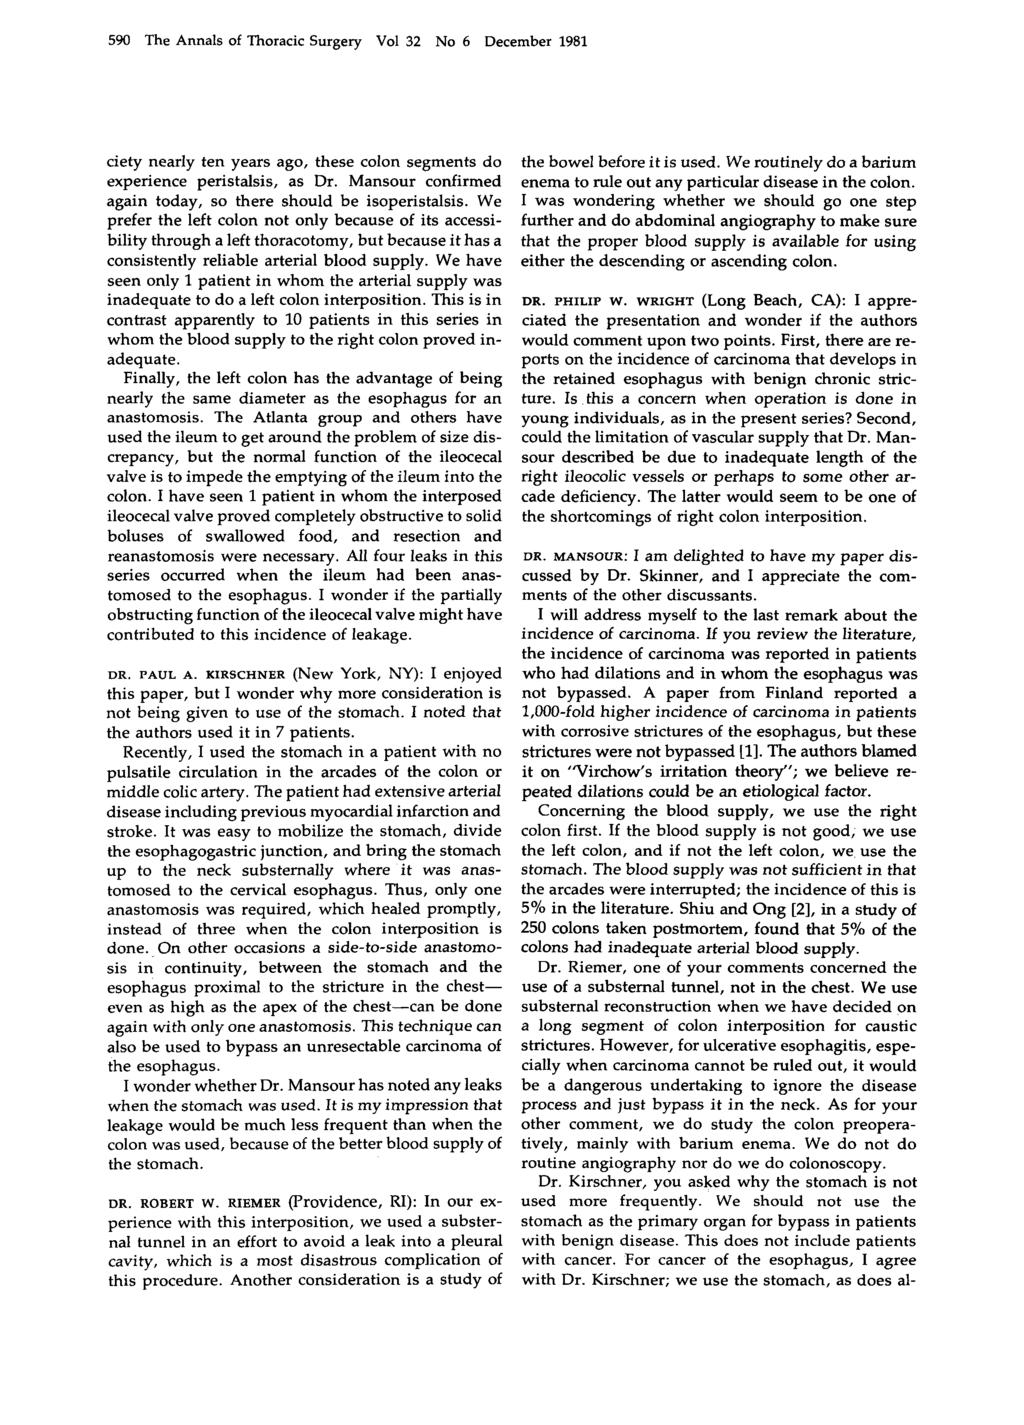 590 The Annals of Thoracic Surgery Vol 32 No 6 December 1981 ciety nearly ten years ago, these colon segments do experience peristalsis, as Dr.